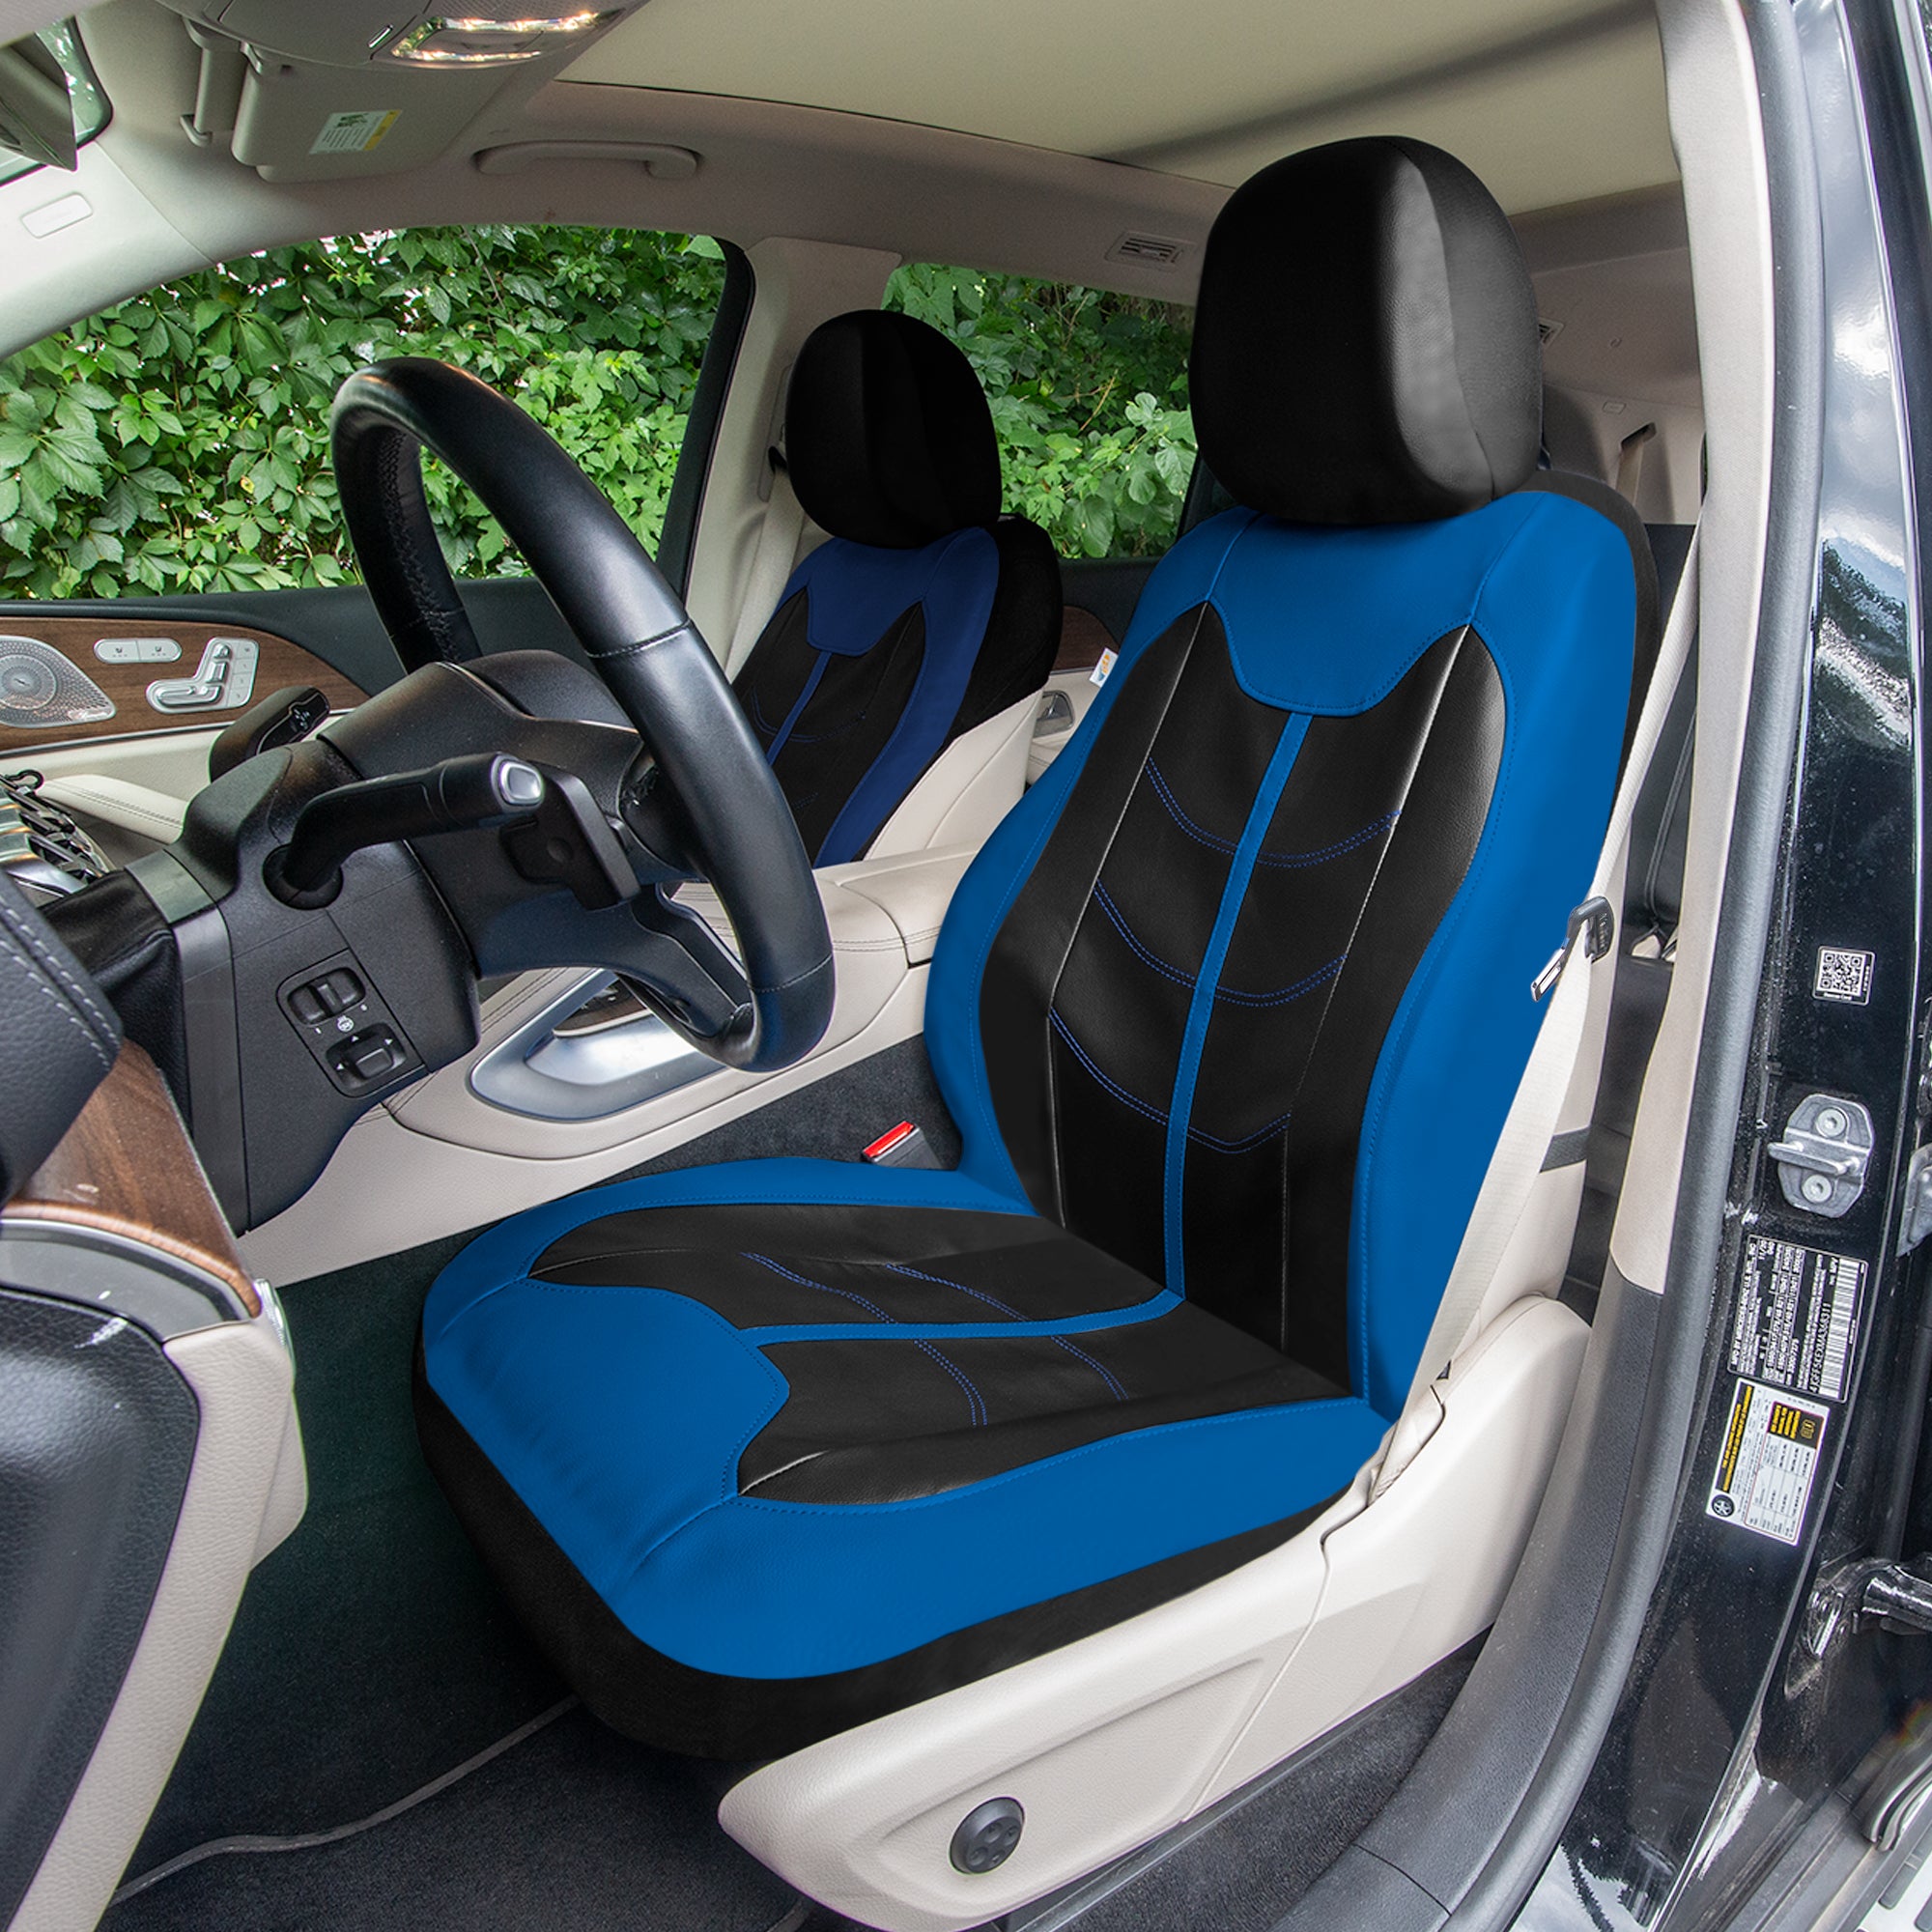 TLH Universal Fit Car Seat Cover - Full Set of Automotive Seat Covers Blue